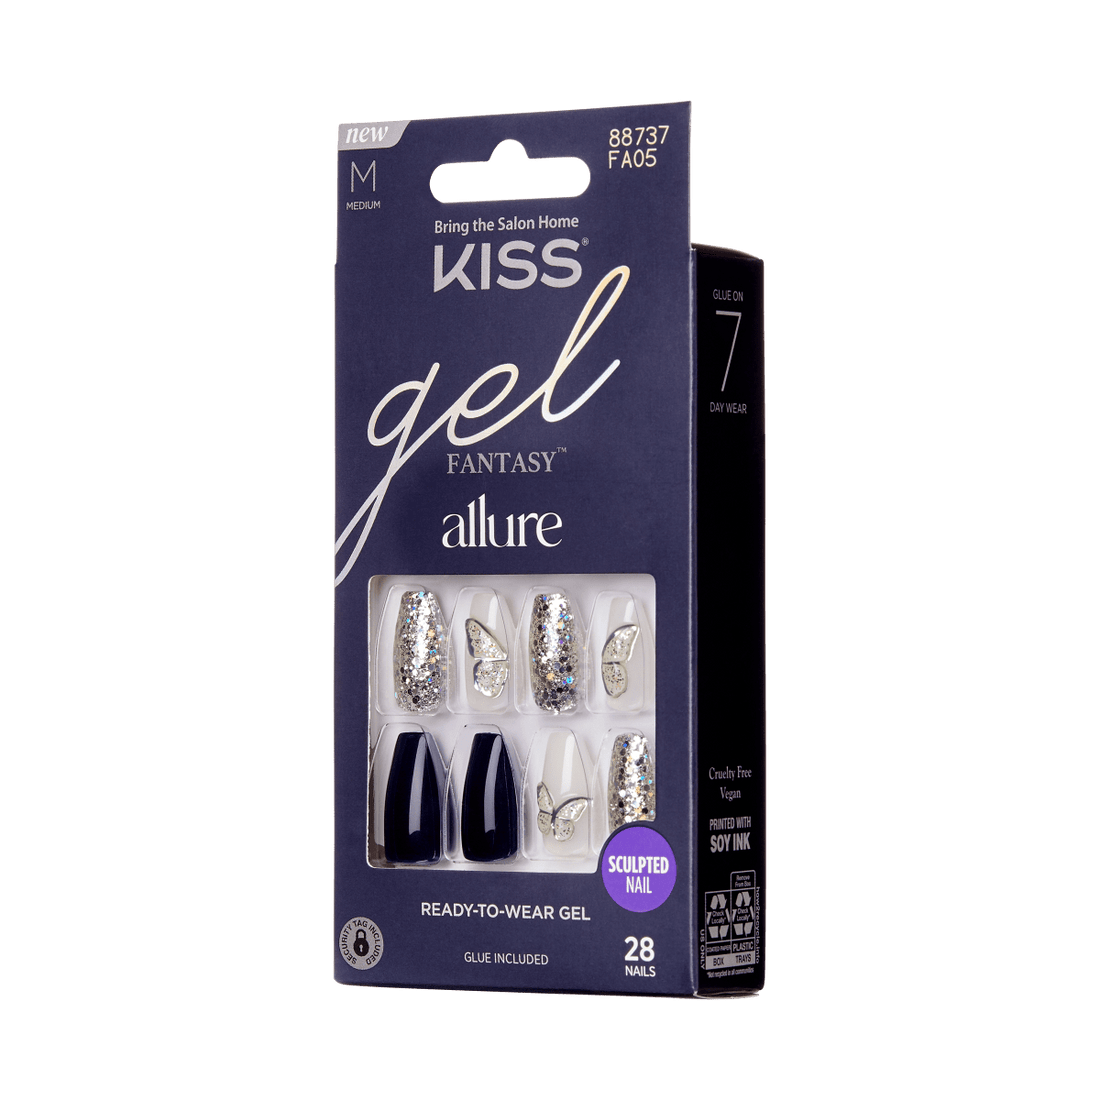 KISS Gel Fantasy, Press-On Nails, Stunned By You, Blue, Med Coffin, 28ct